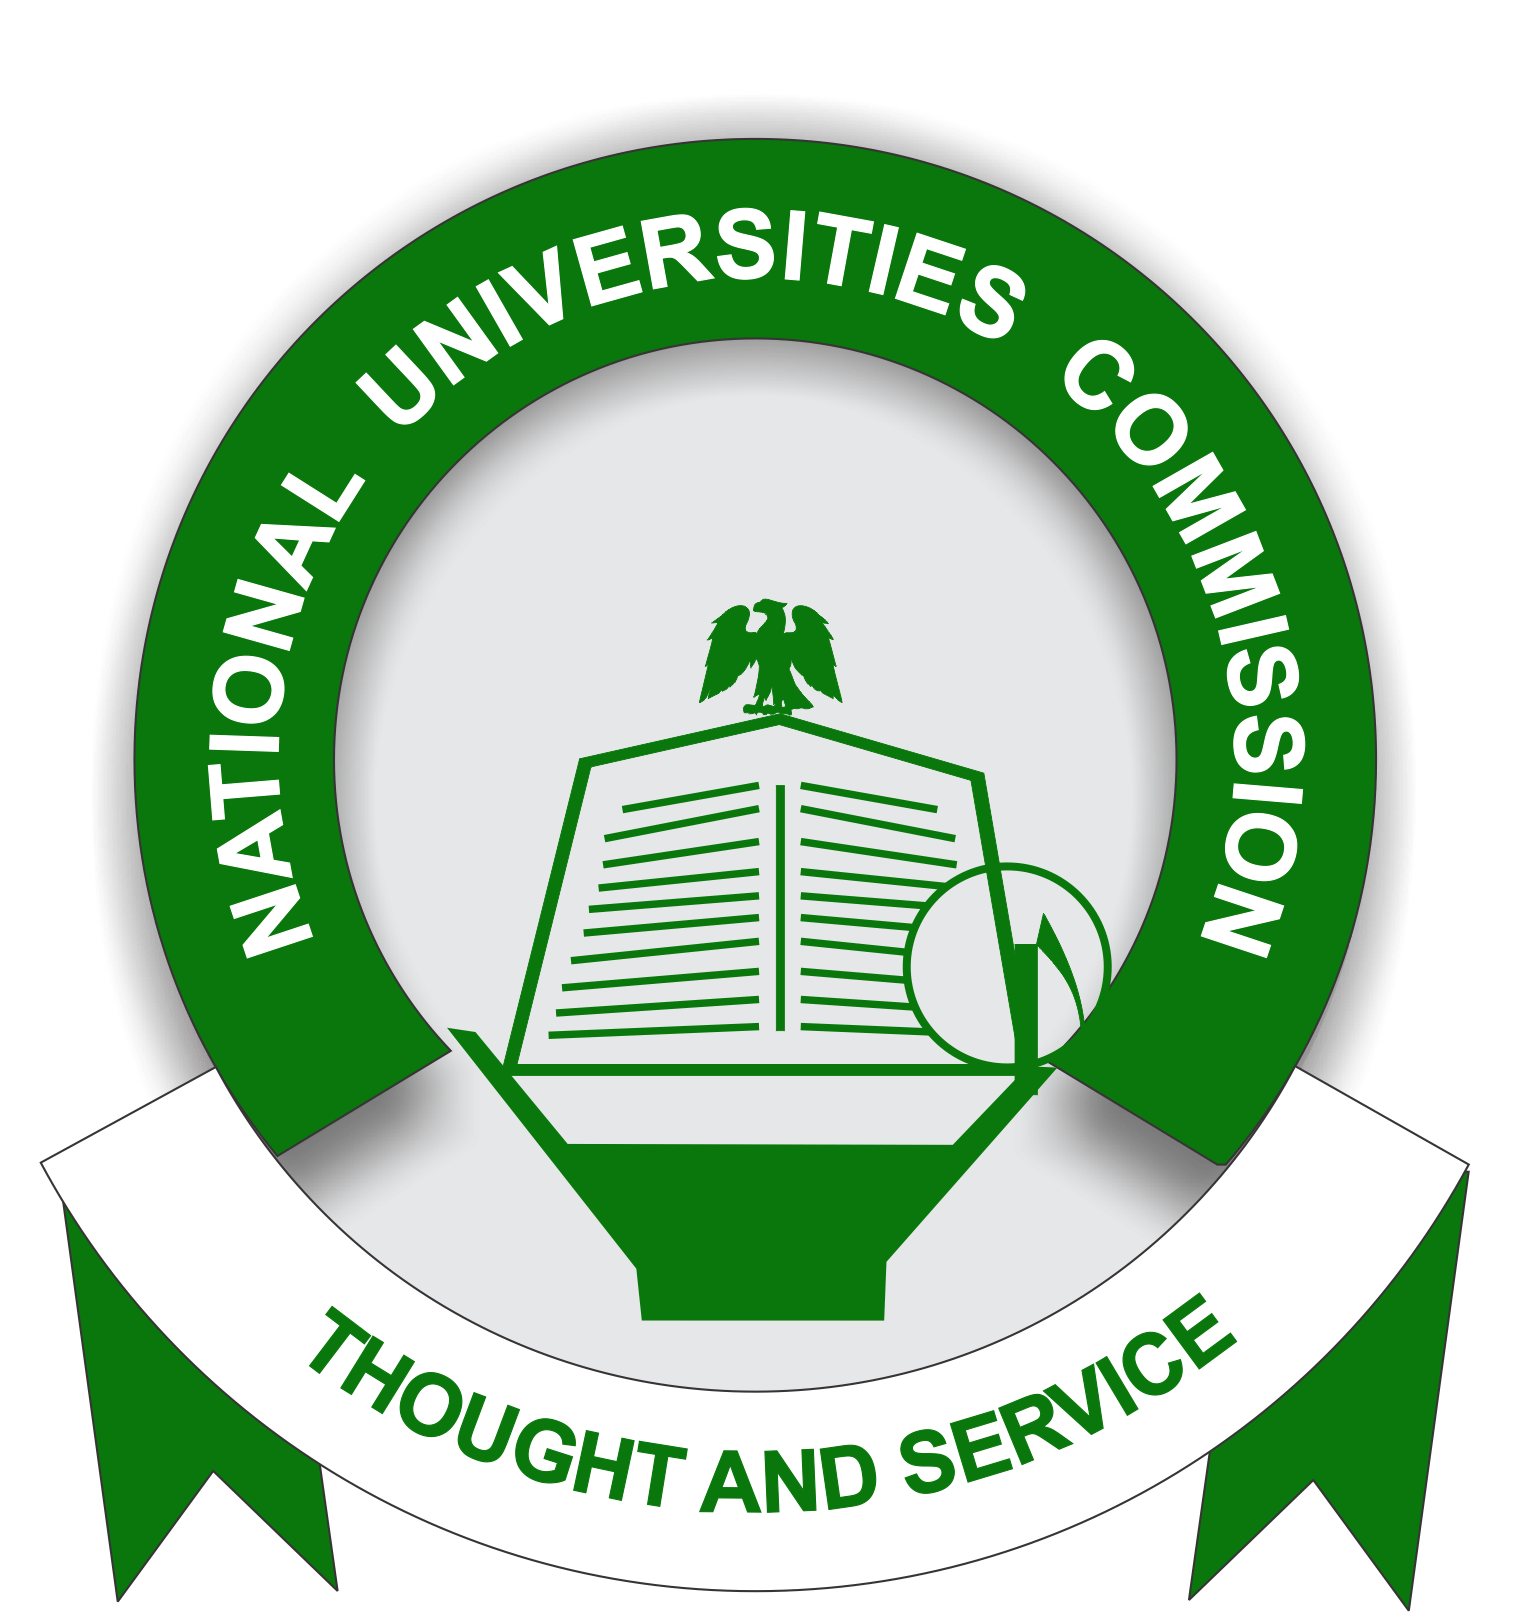 The National Universities Commission (NUC) has approved 22 additional programs for Bingham University